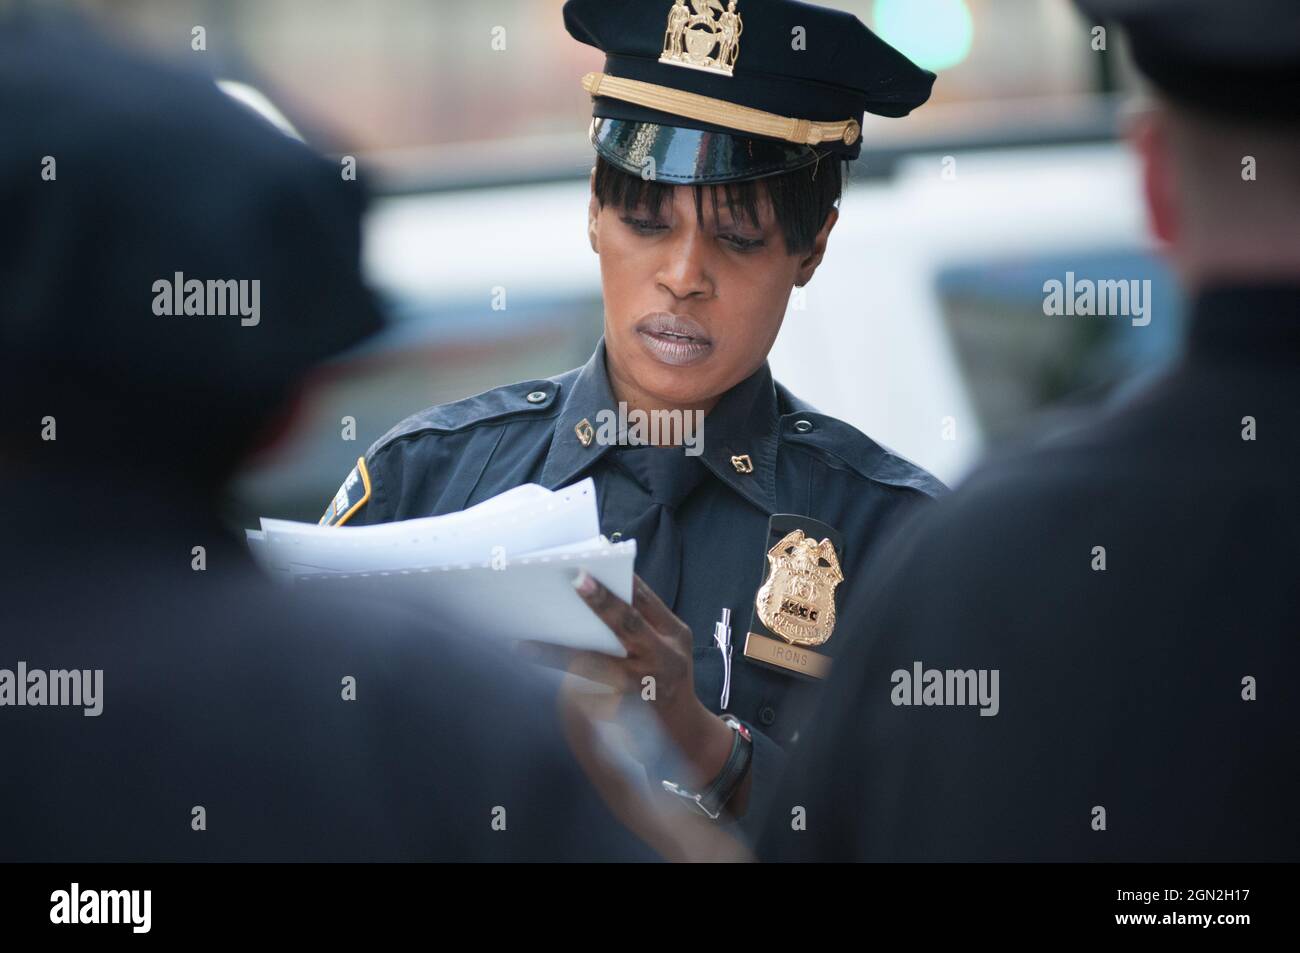 UNITED STATES, NEW YORK, MANHATTAN BOROUGH, TIMES SQUARE, PORTRAIT OF A POLICEWOMAN ON A TIMES SQUARE STREET Stock Photo